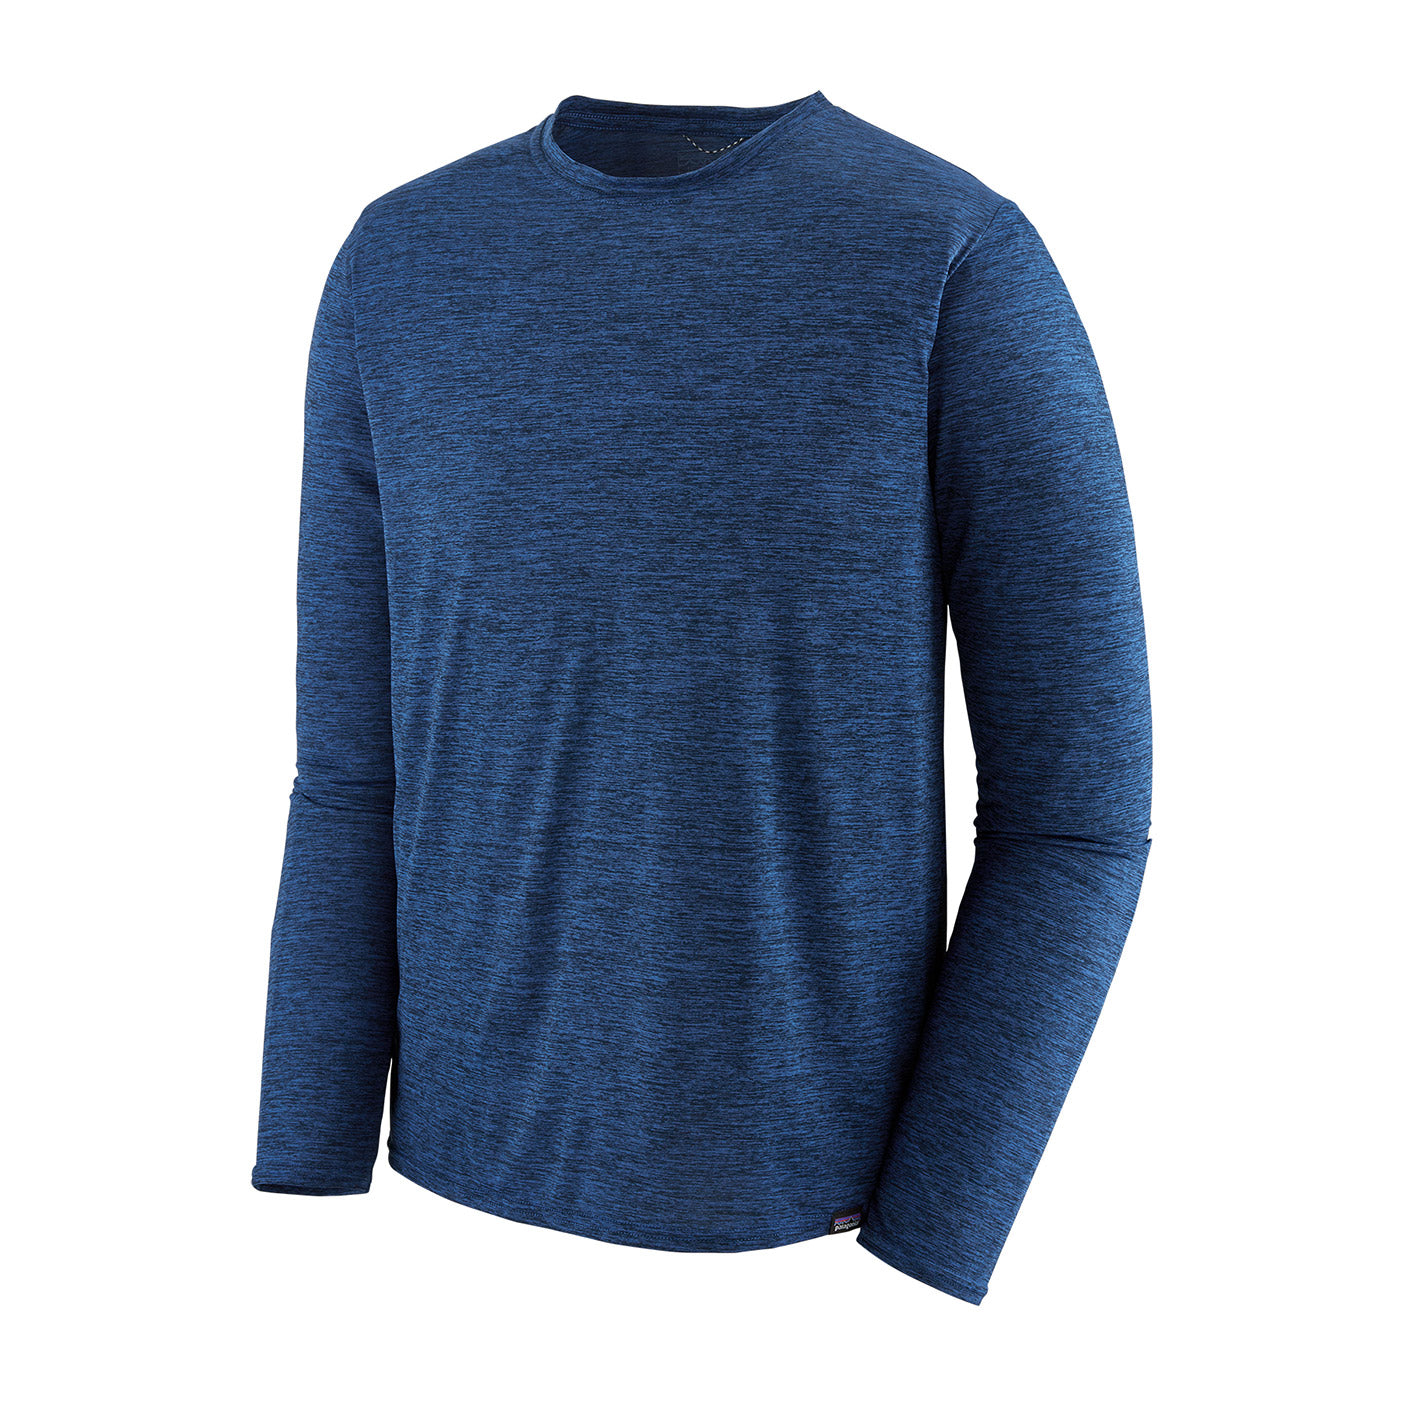 patagonia mens long sleeve capilene cool daily shirt in viking blue navy blue x dye front view